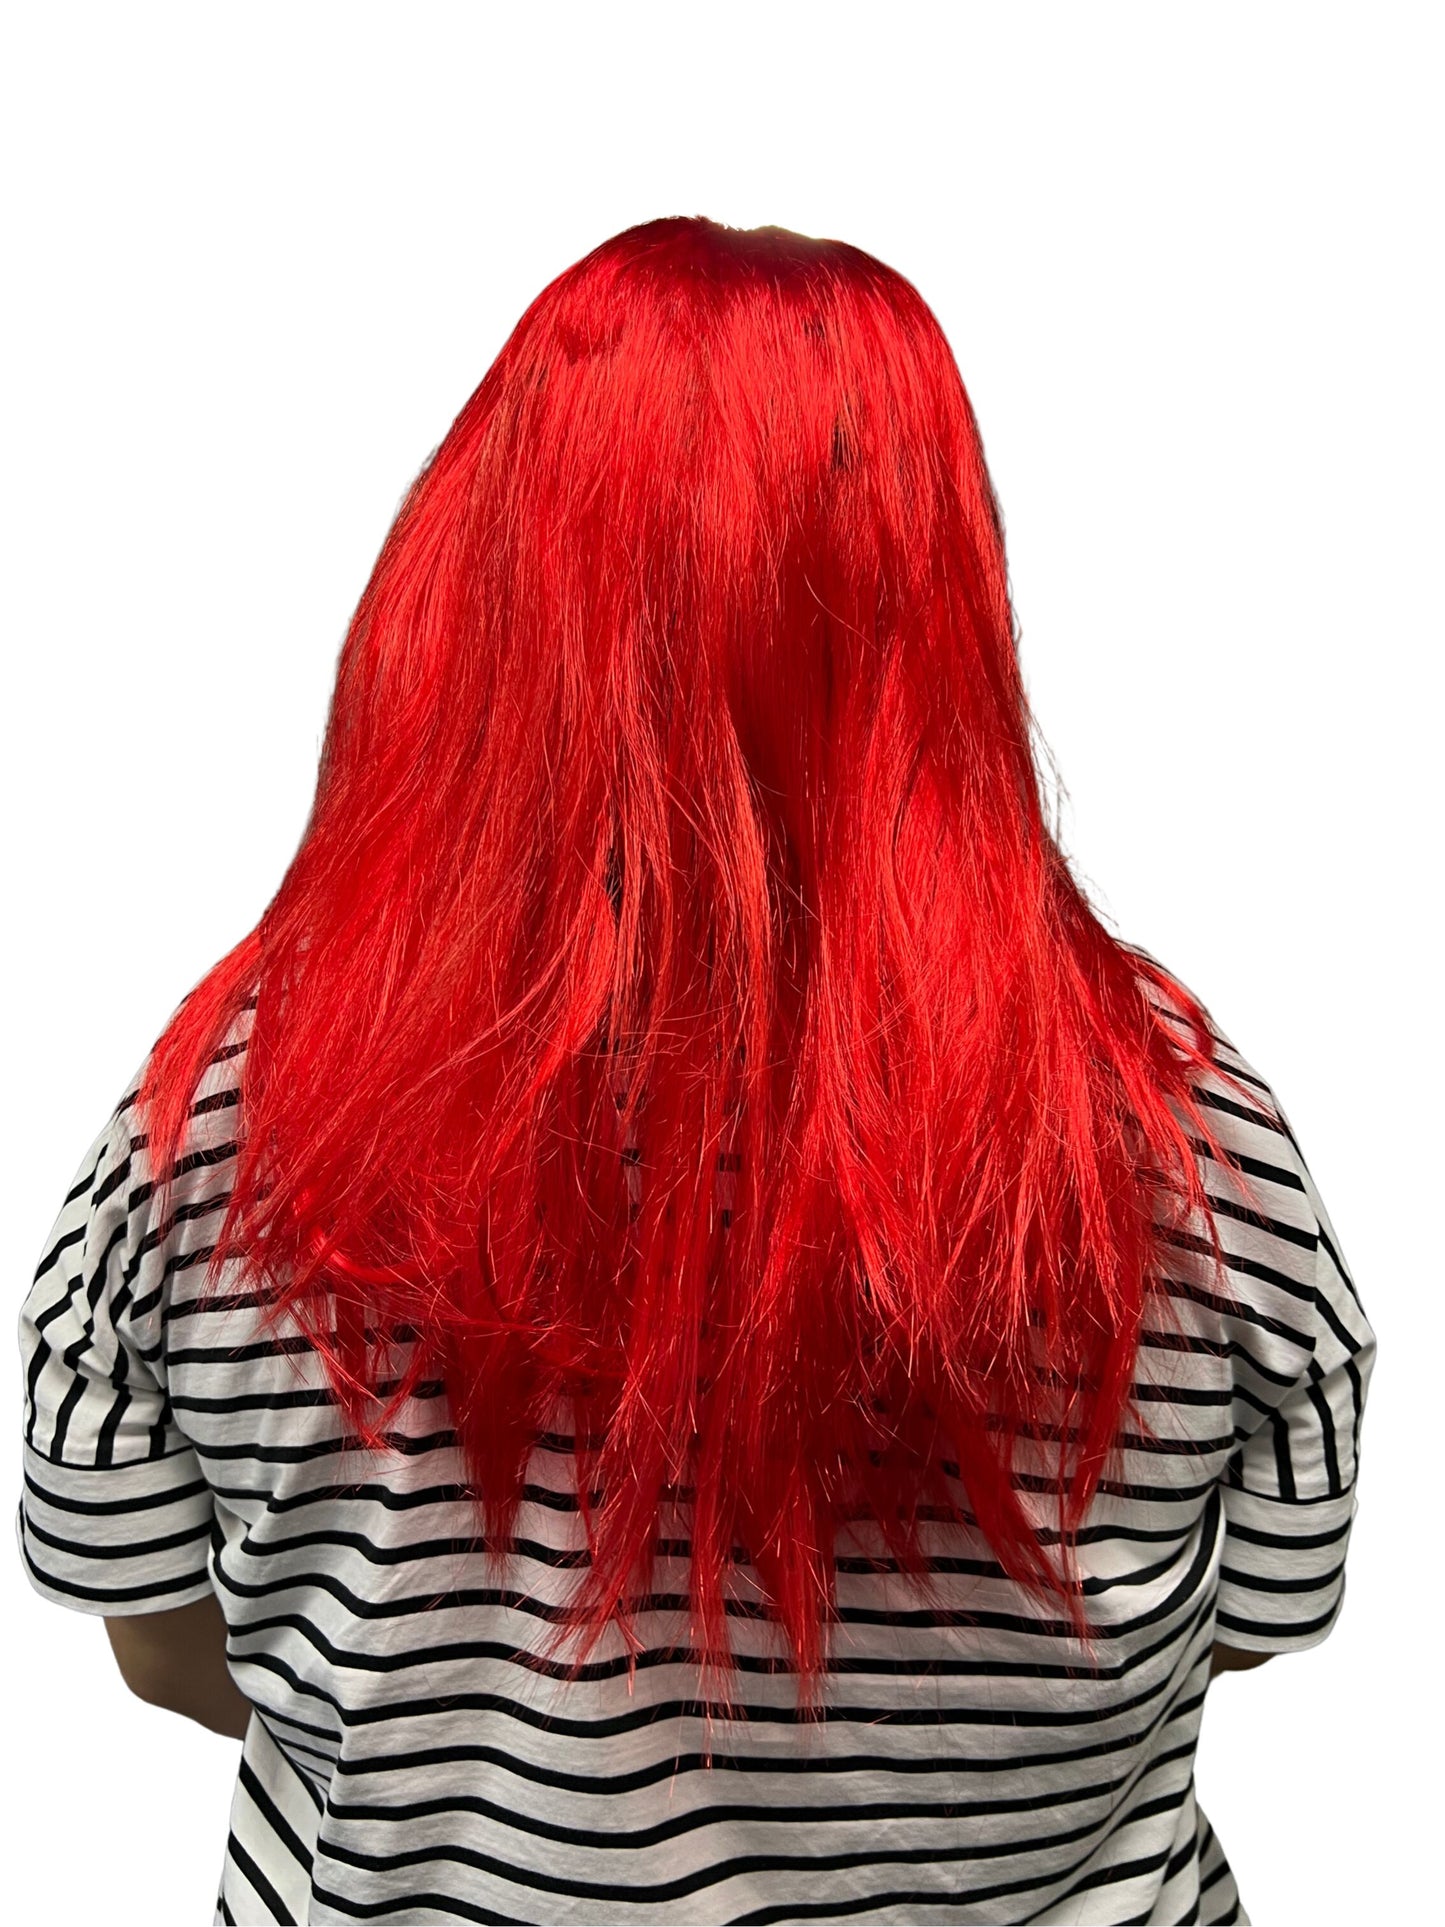 Ladies Long Red Fancy Dress Wig Ideal for Parties, Festivals, Concerts, Cosplay